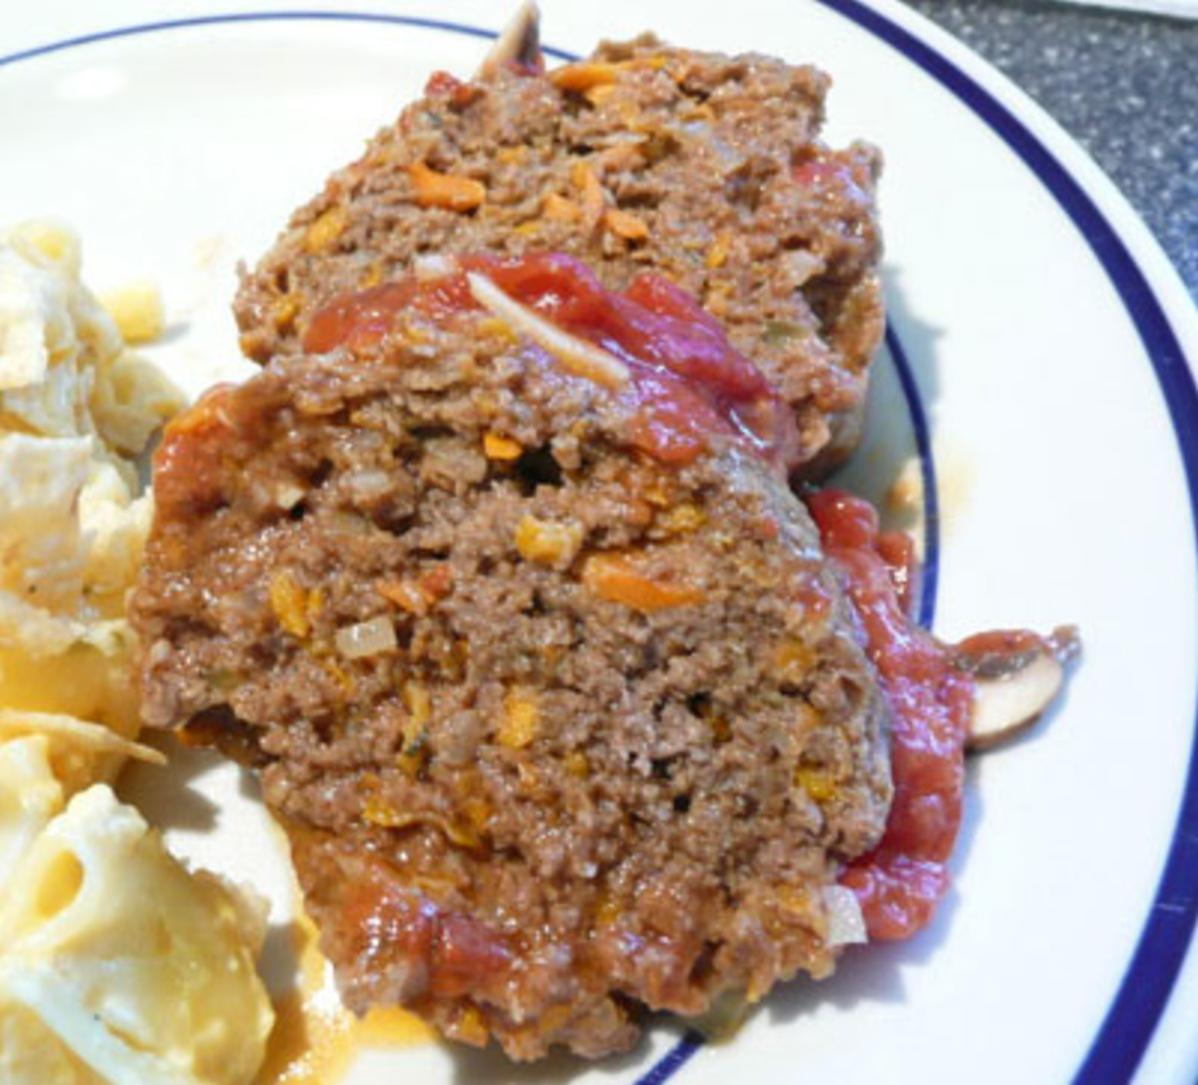  This savory gluten-free meatloaf is sure to impress even the pickiest of eaters